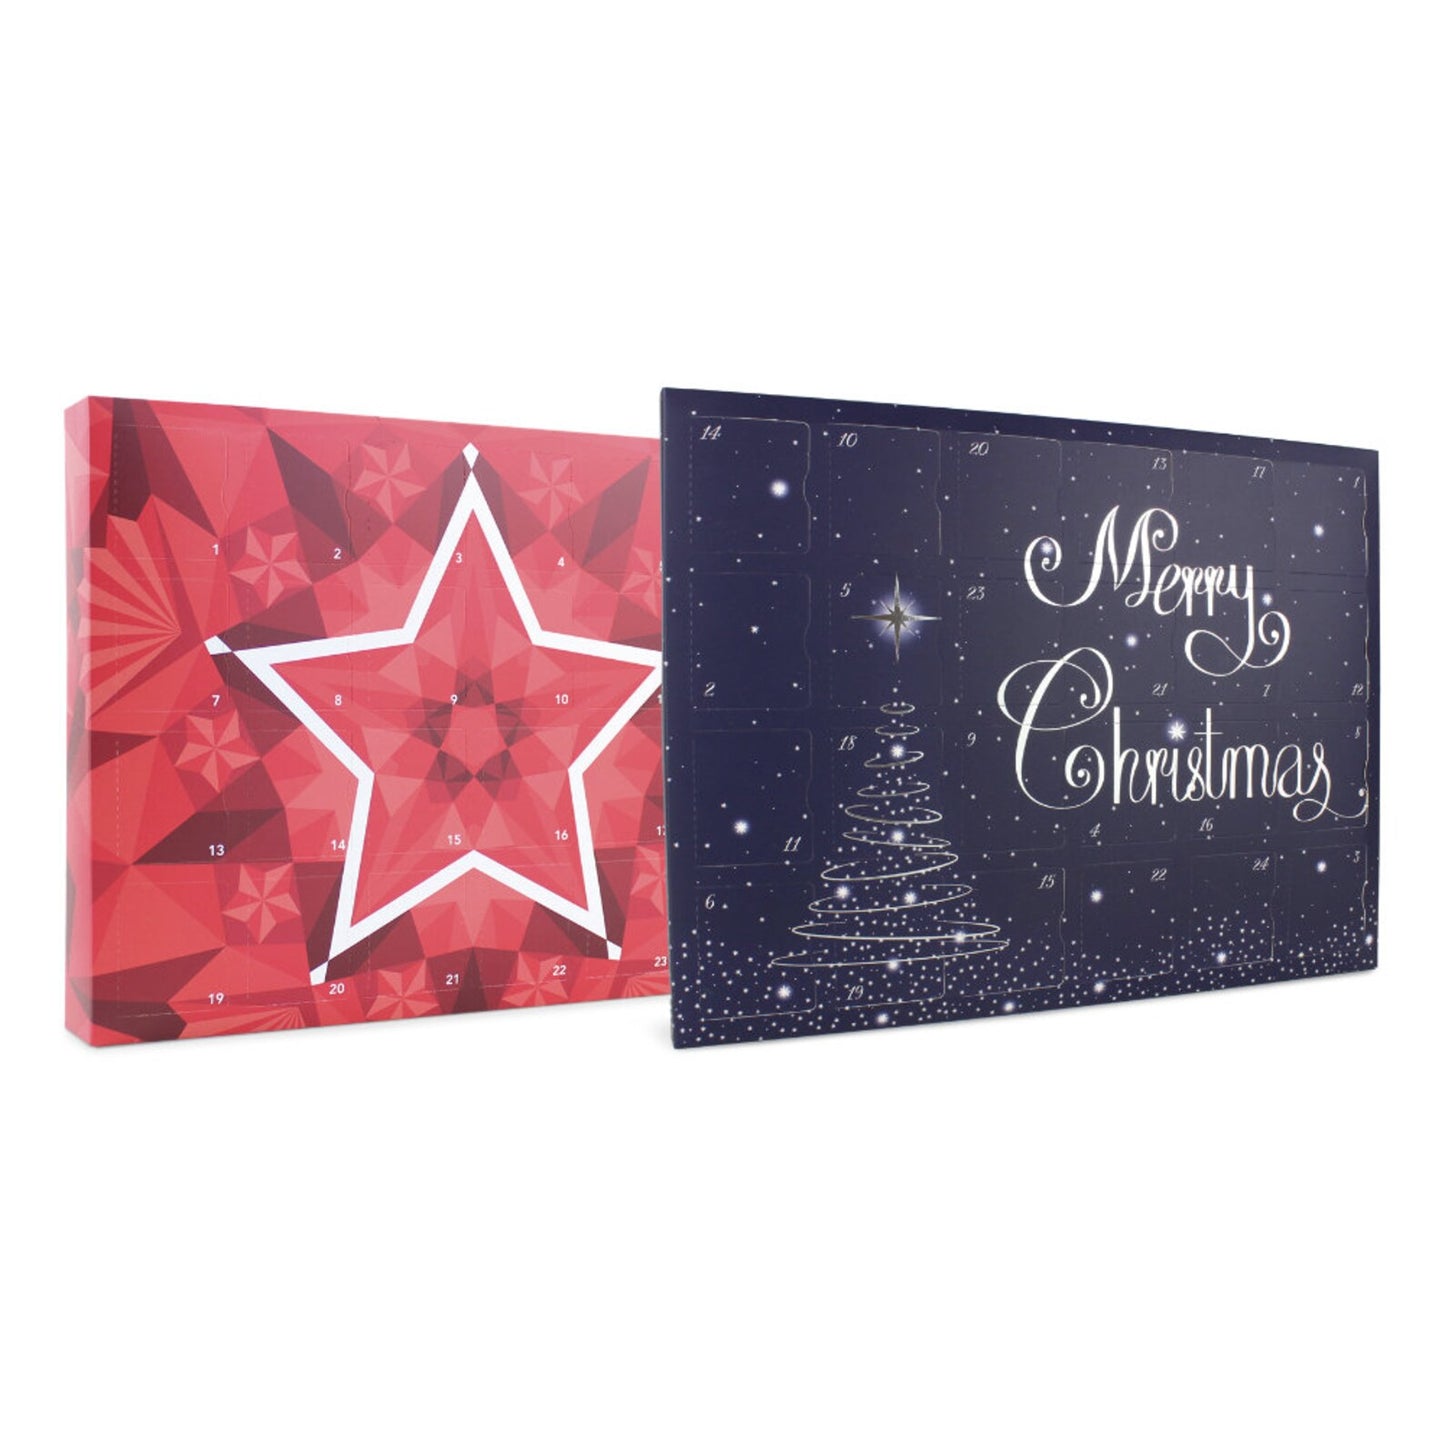 *3 WEEK TURNAROUND*  24 Day Pre-filled Christmas Advent Calendar - 24 Individual Ornaments - Christmas Theme - Kids Advent Calendar - Two Different Colour Options